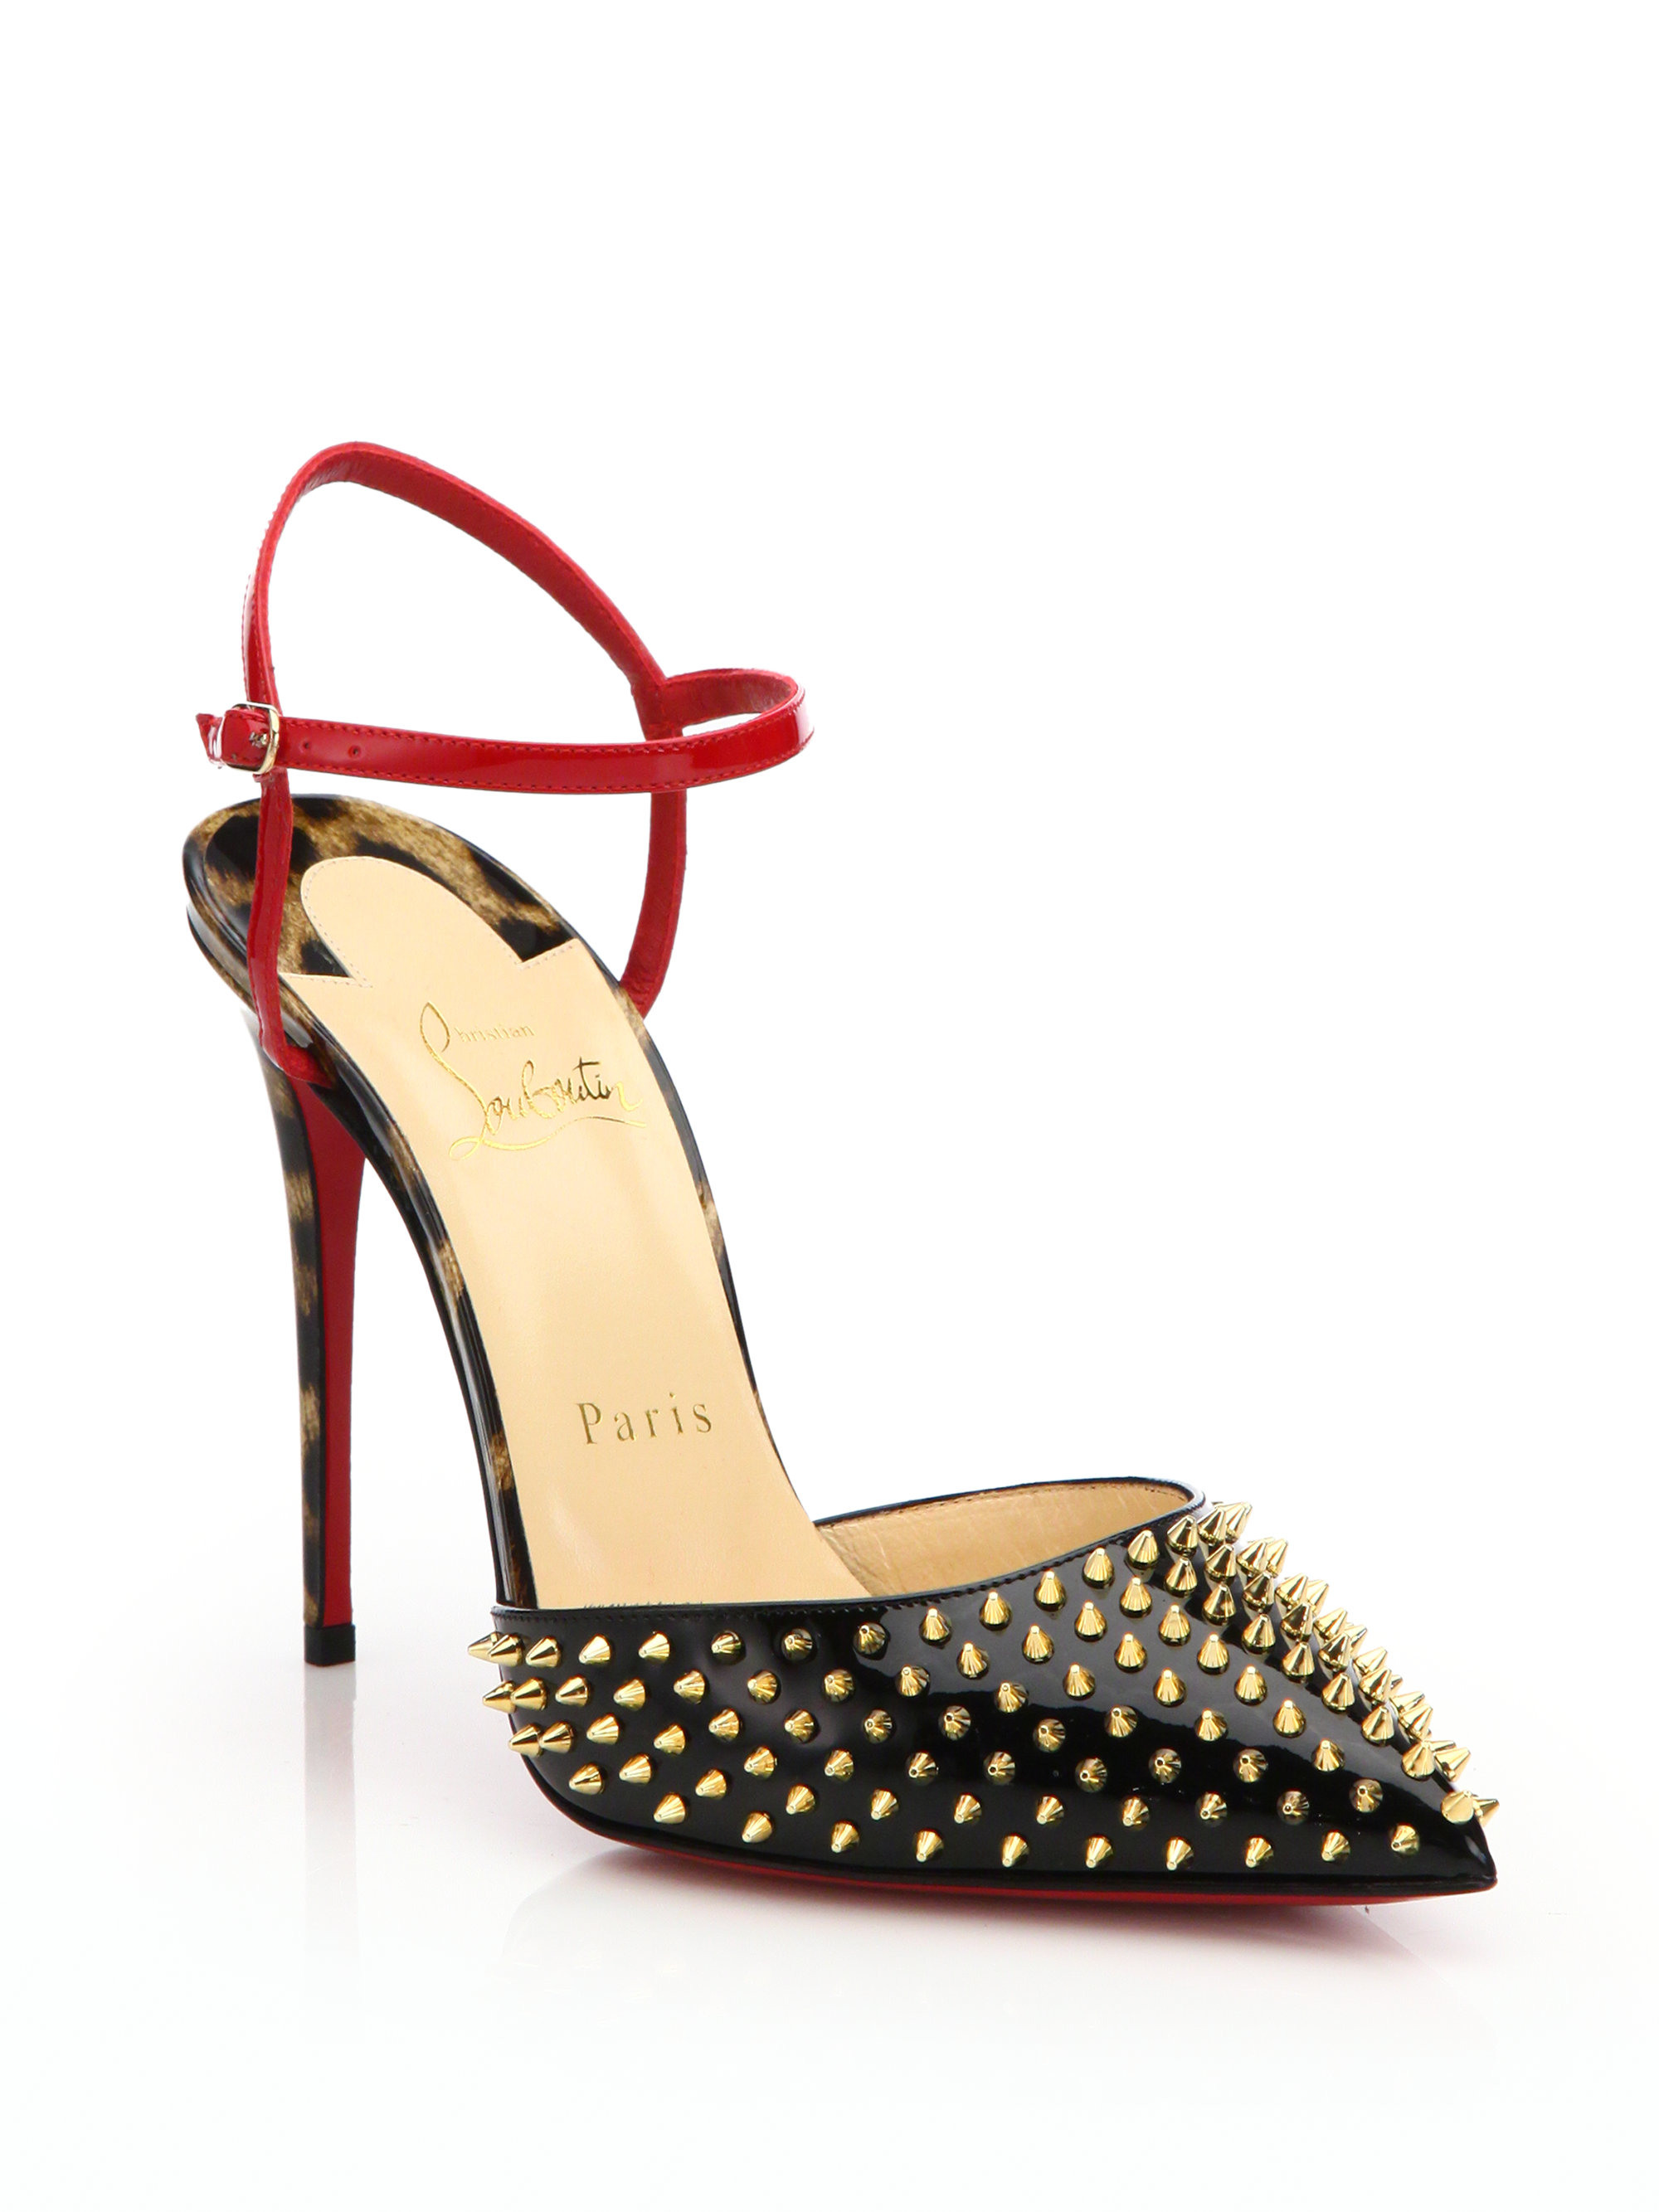 Christian louboutin Baila Spike Studded Leather Pumps in Red ...  